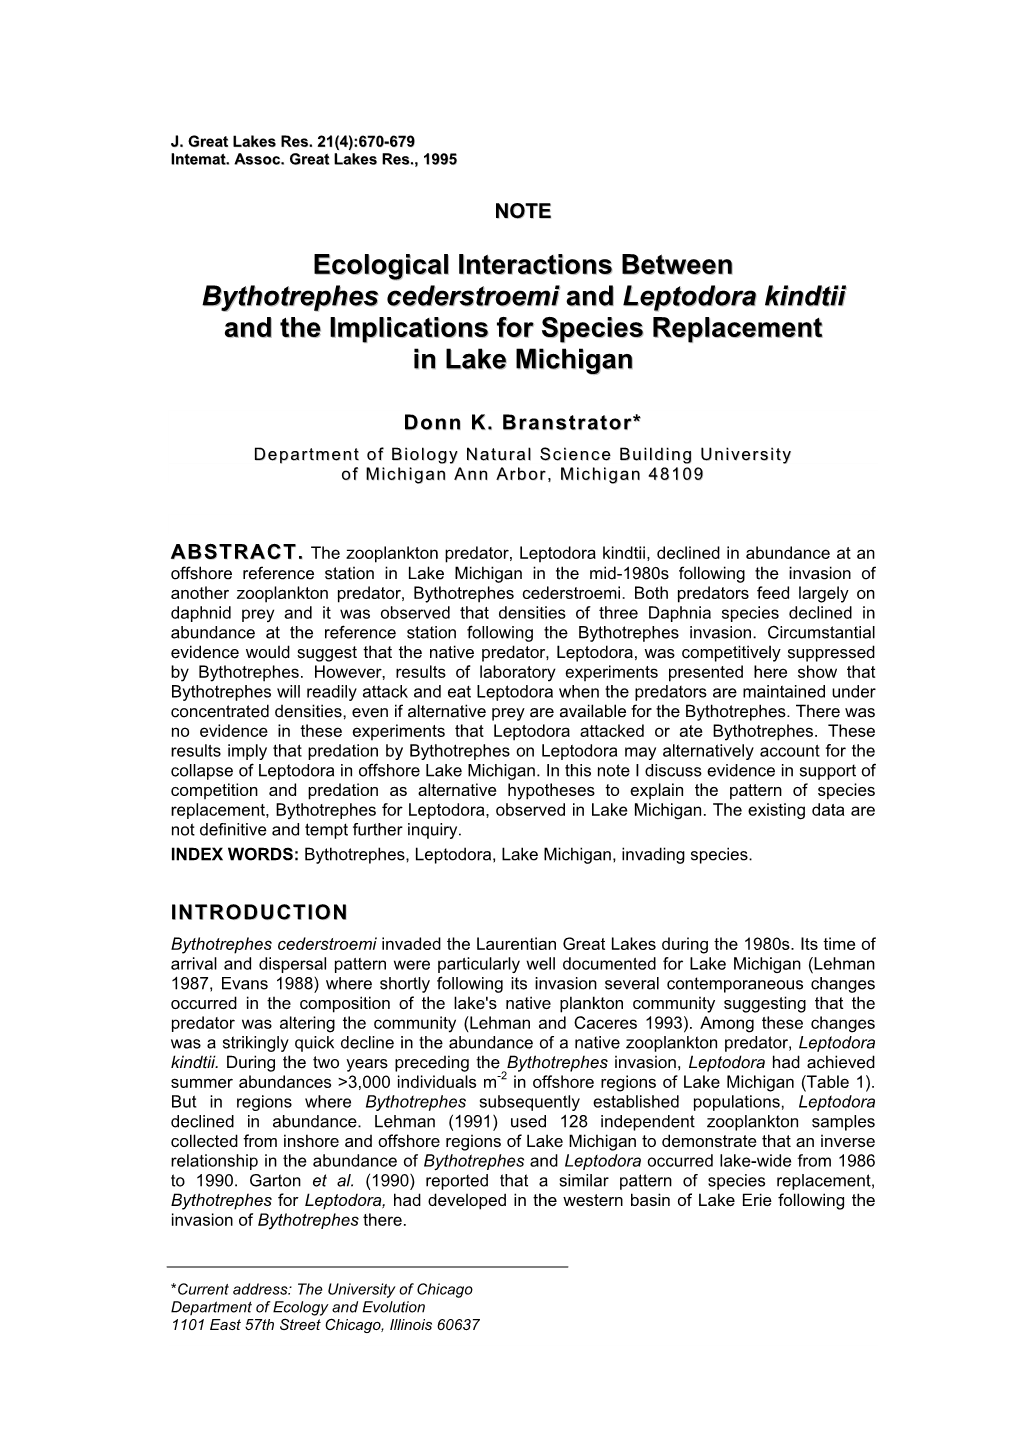 Ecological Interactions Between Bythotrephes Cederstroemi and Leptodora Kindtii and the Implications for Species Replacement in Lake Michigan